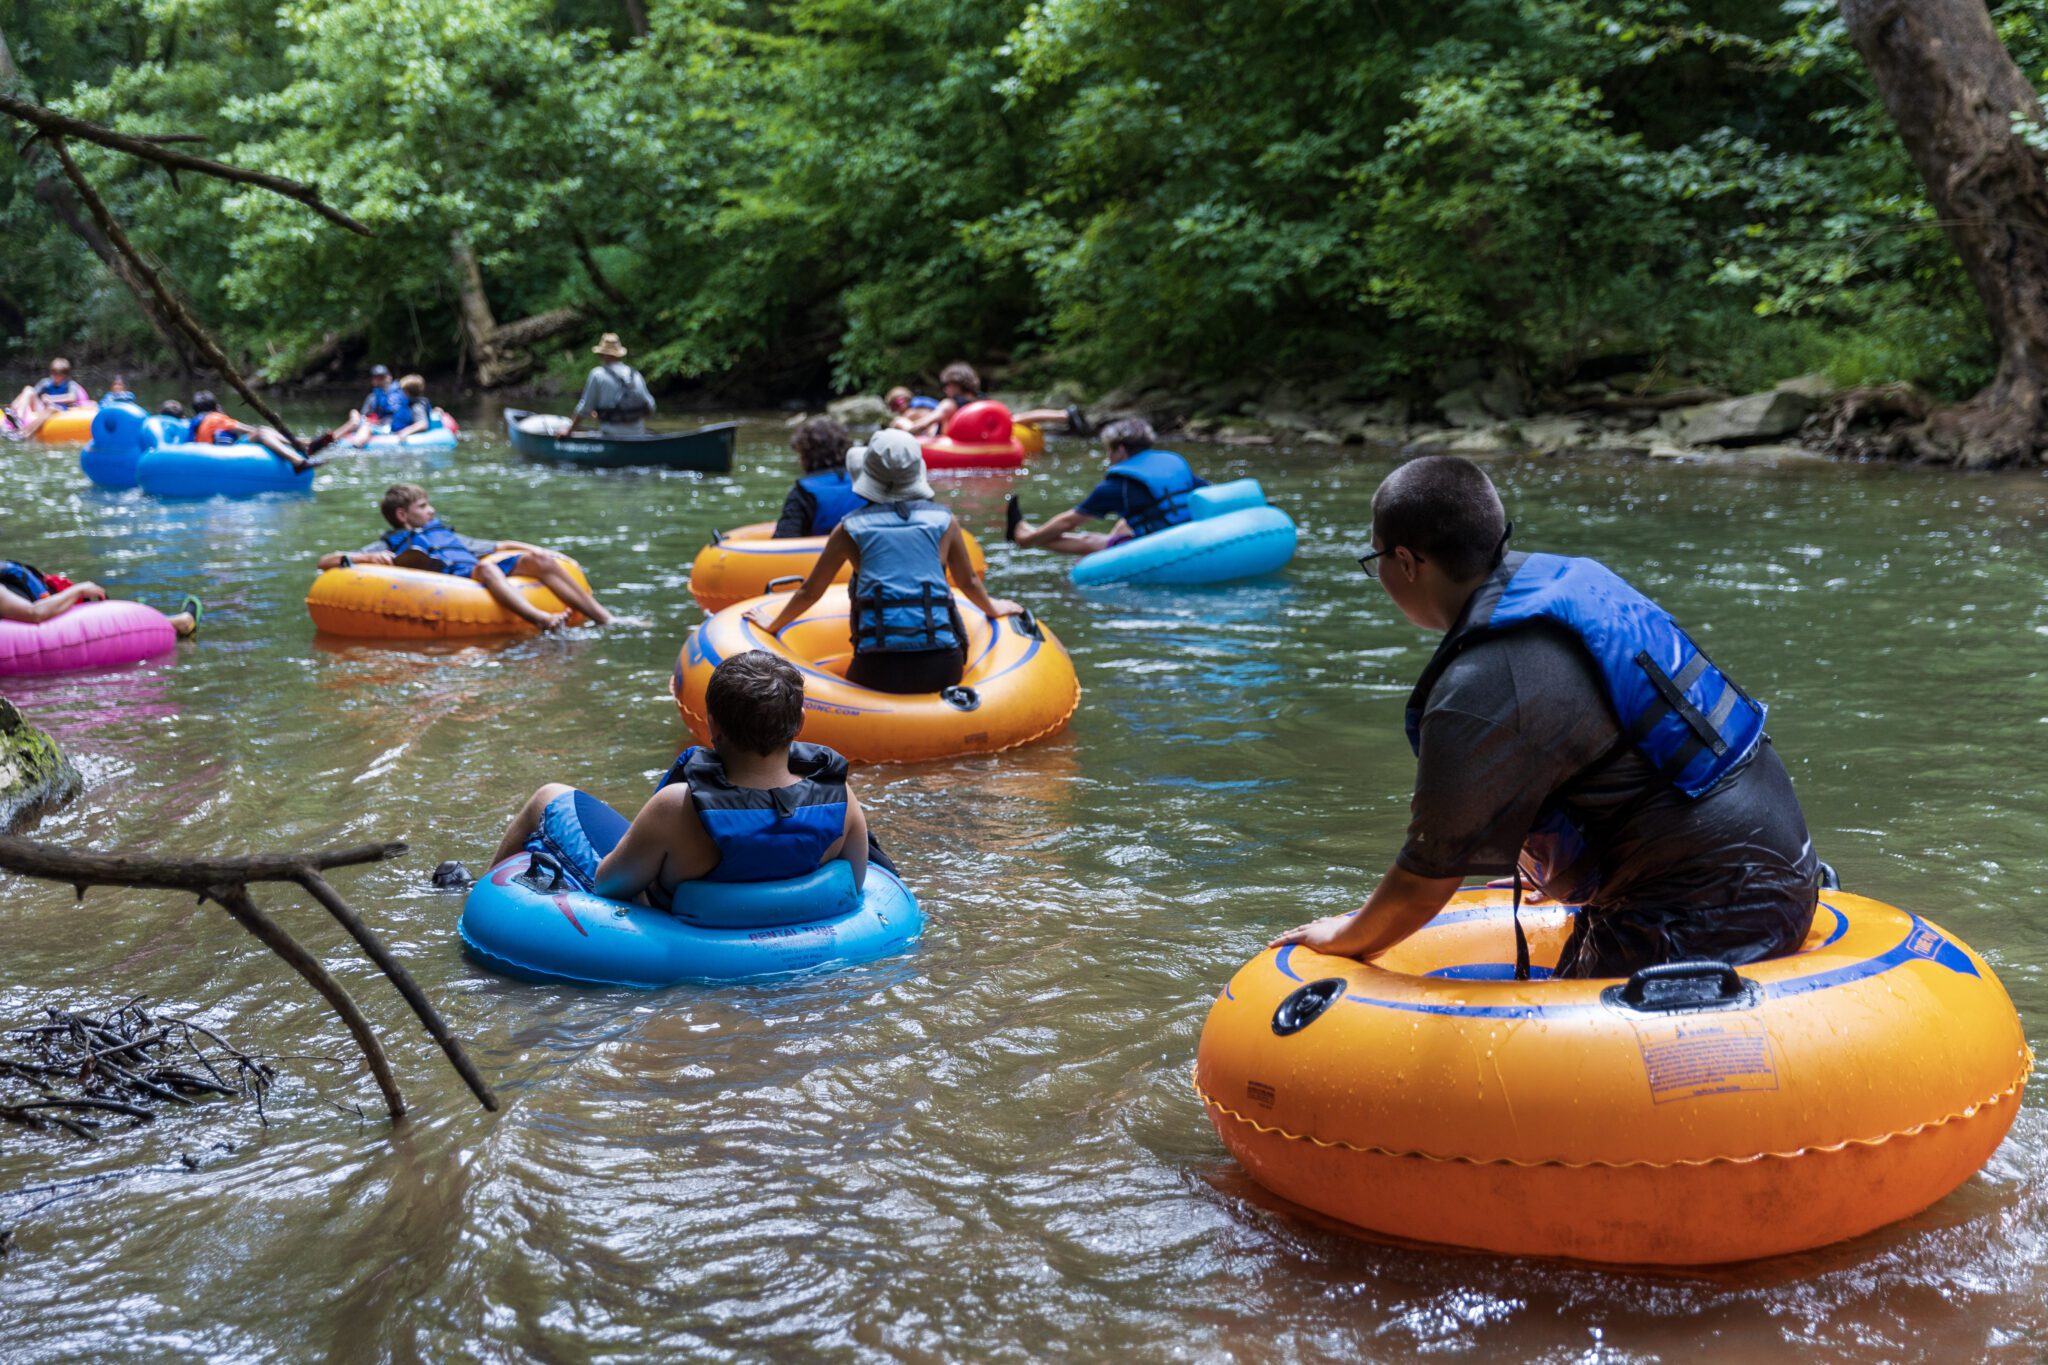 The participants of the P.L.E.D.G.E. Leadership Program embark on an exciting adventure, coming together as a group to float down a river on tubes.